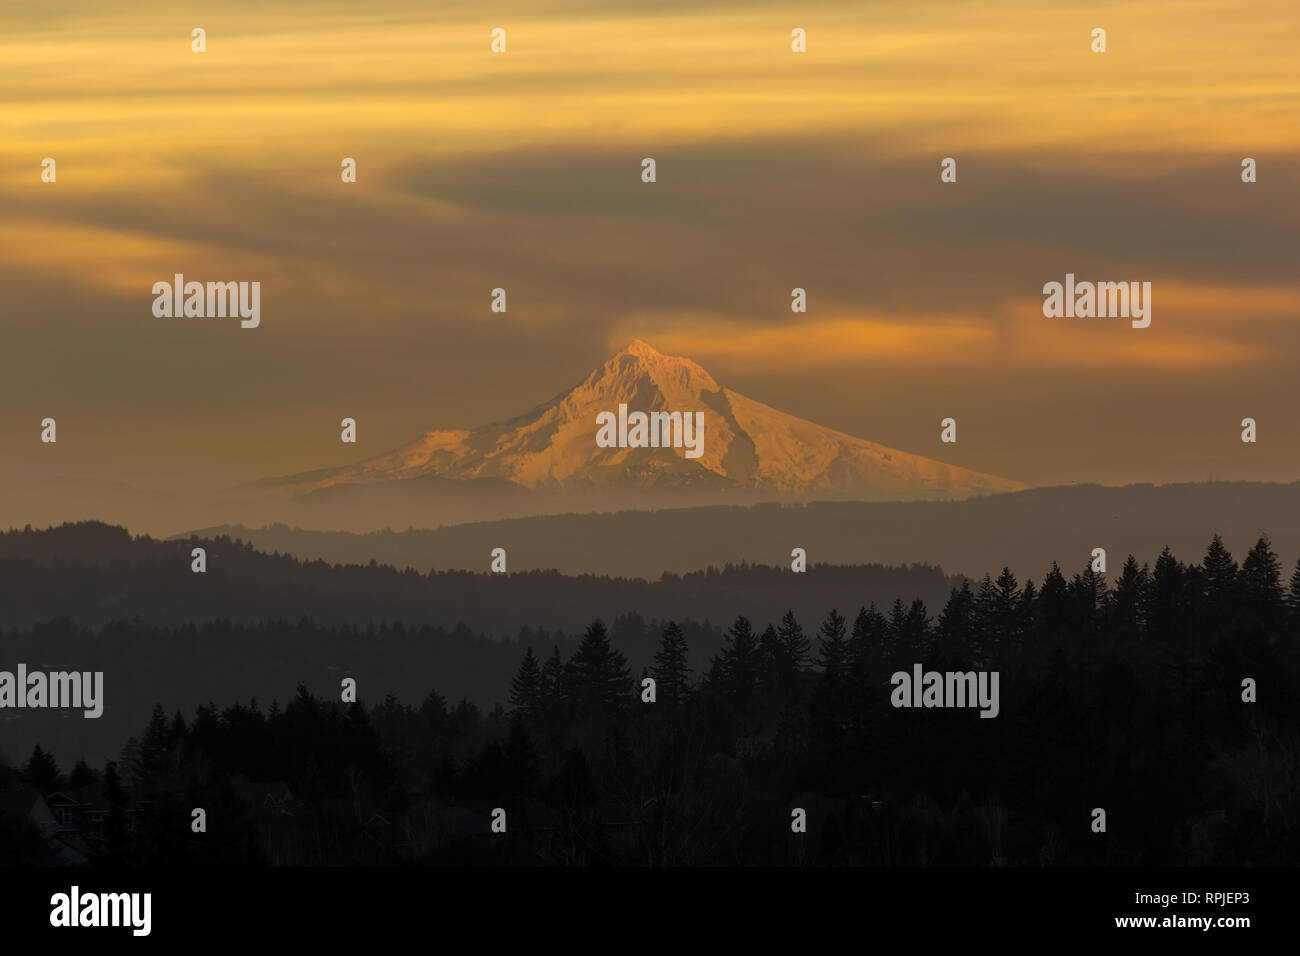 Mount Hood view from Happy Valley Oregon during a hazy sunset day in winter season Stock Photo